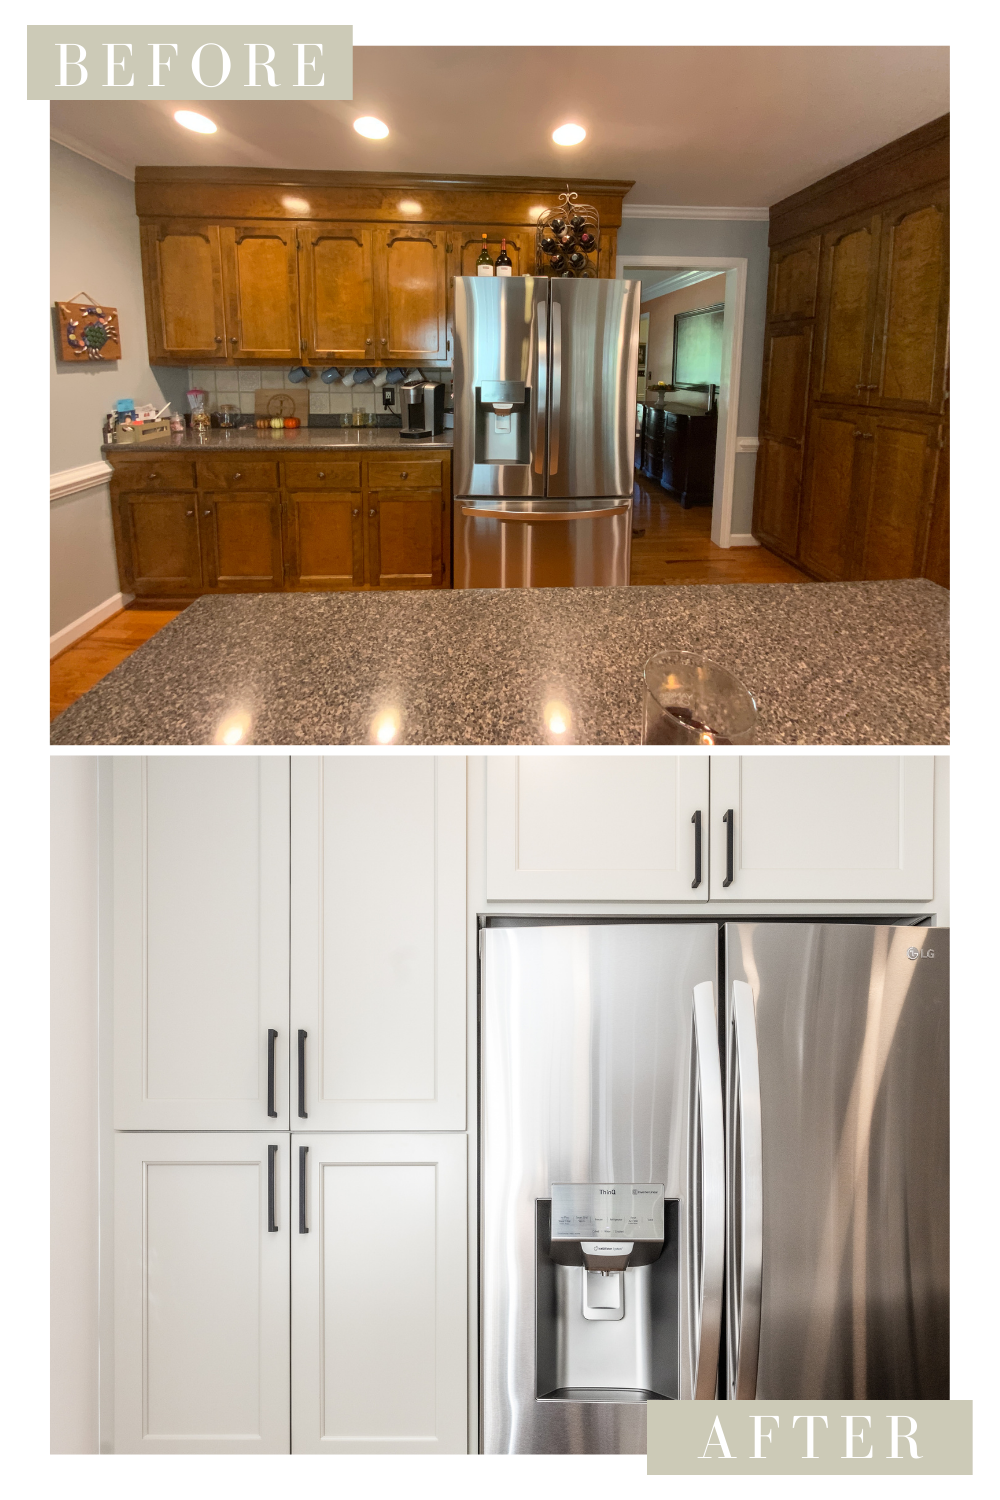  Before and after of a custom kitchen remodel featuring a custom, built-in pantry 